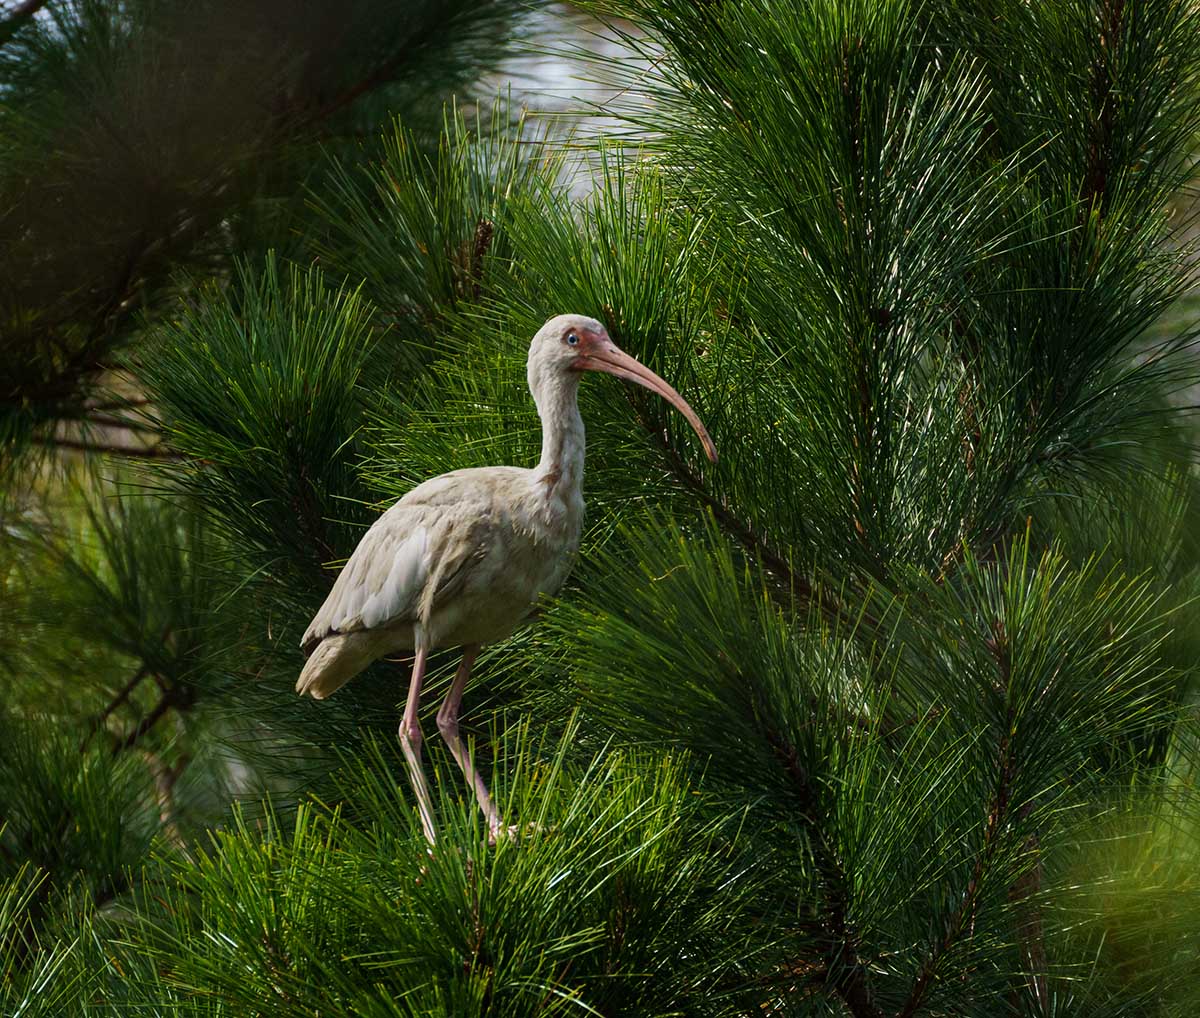 A white ibis in a pine tree